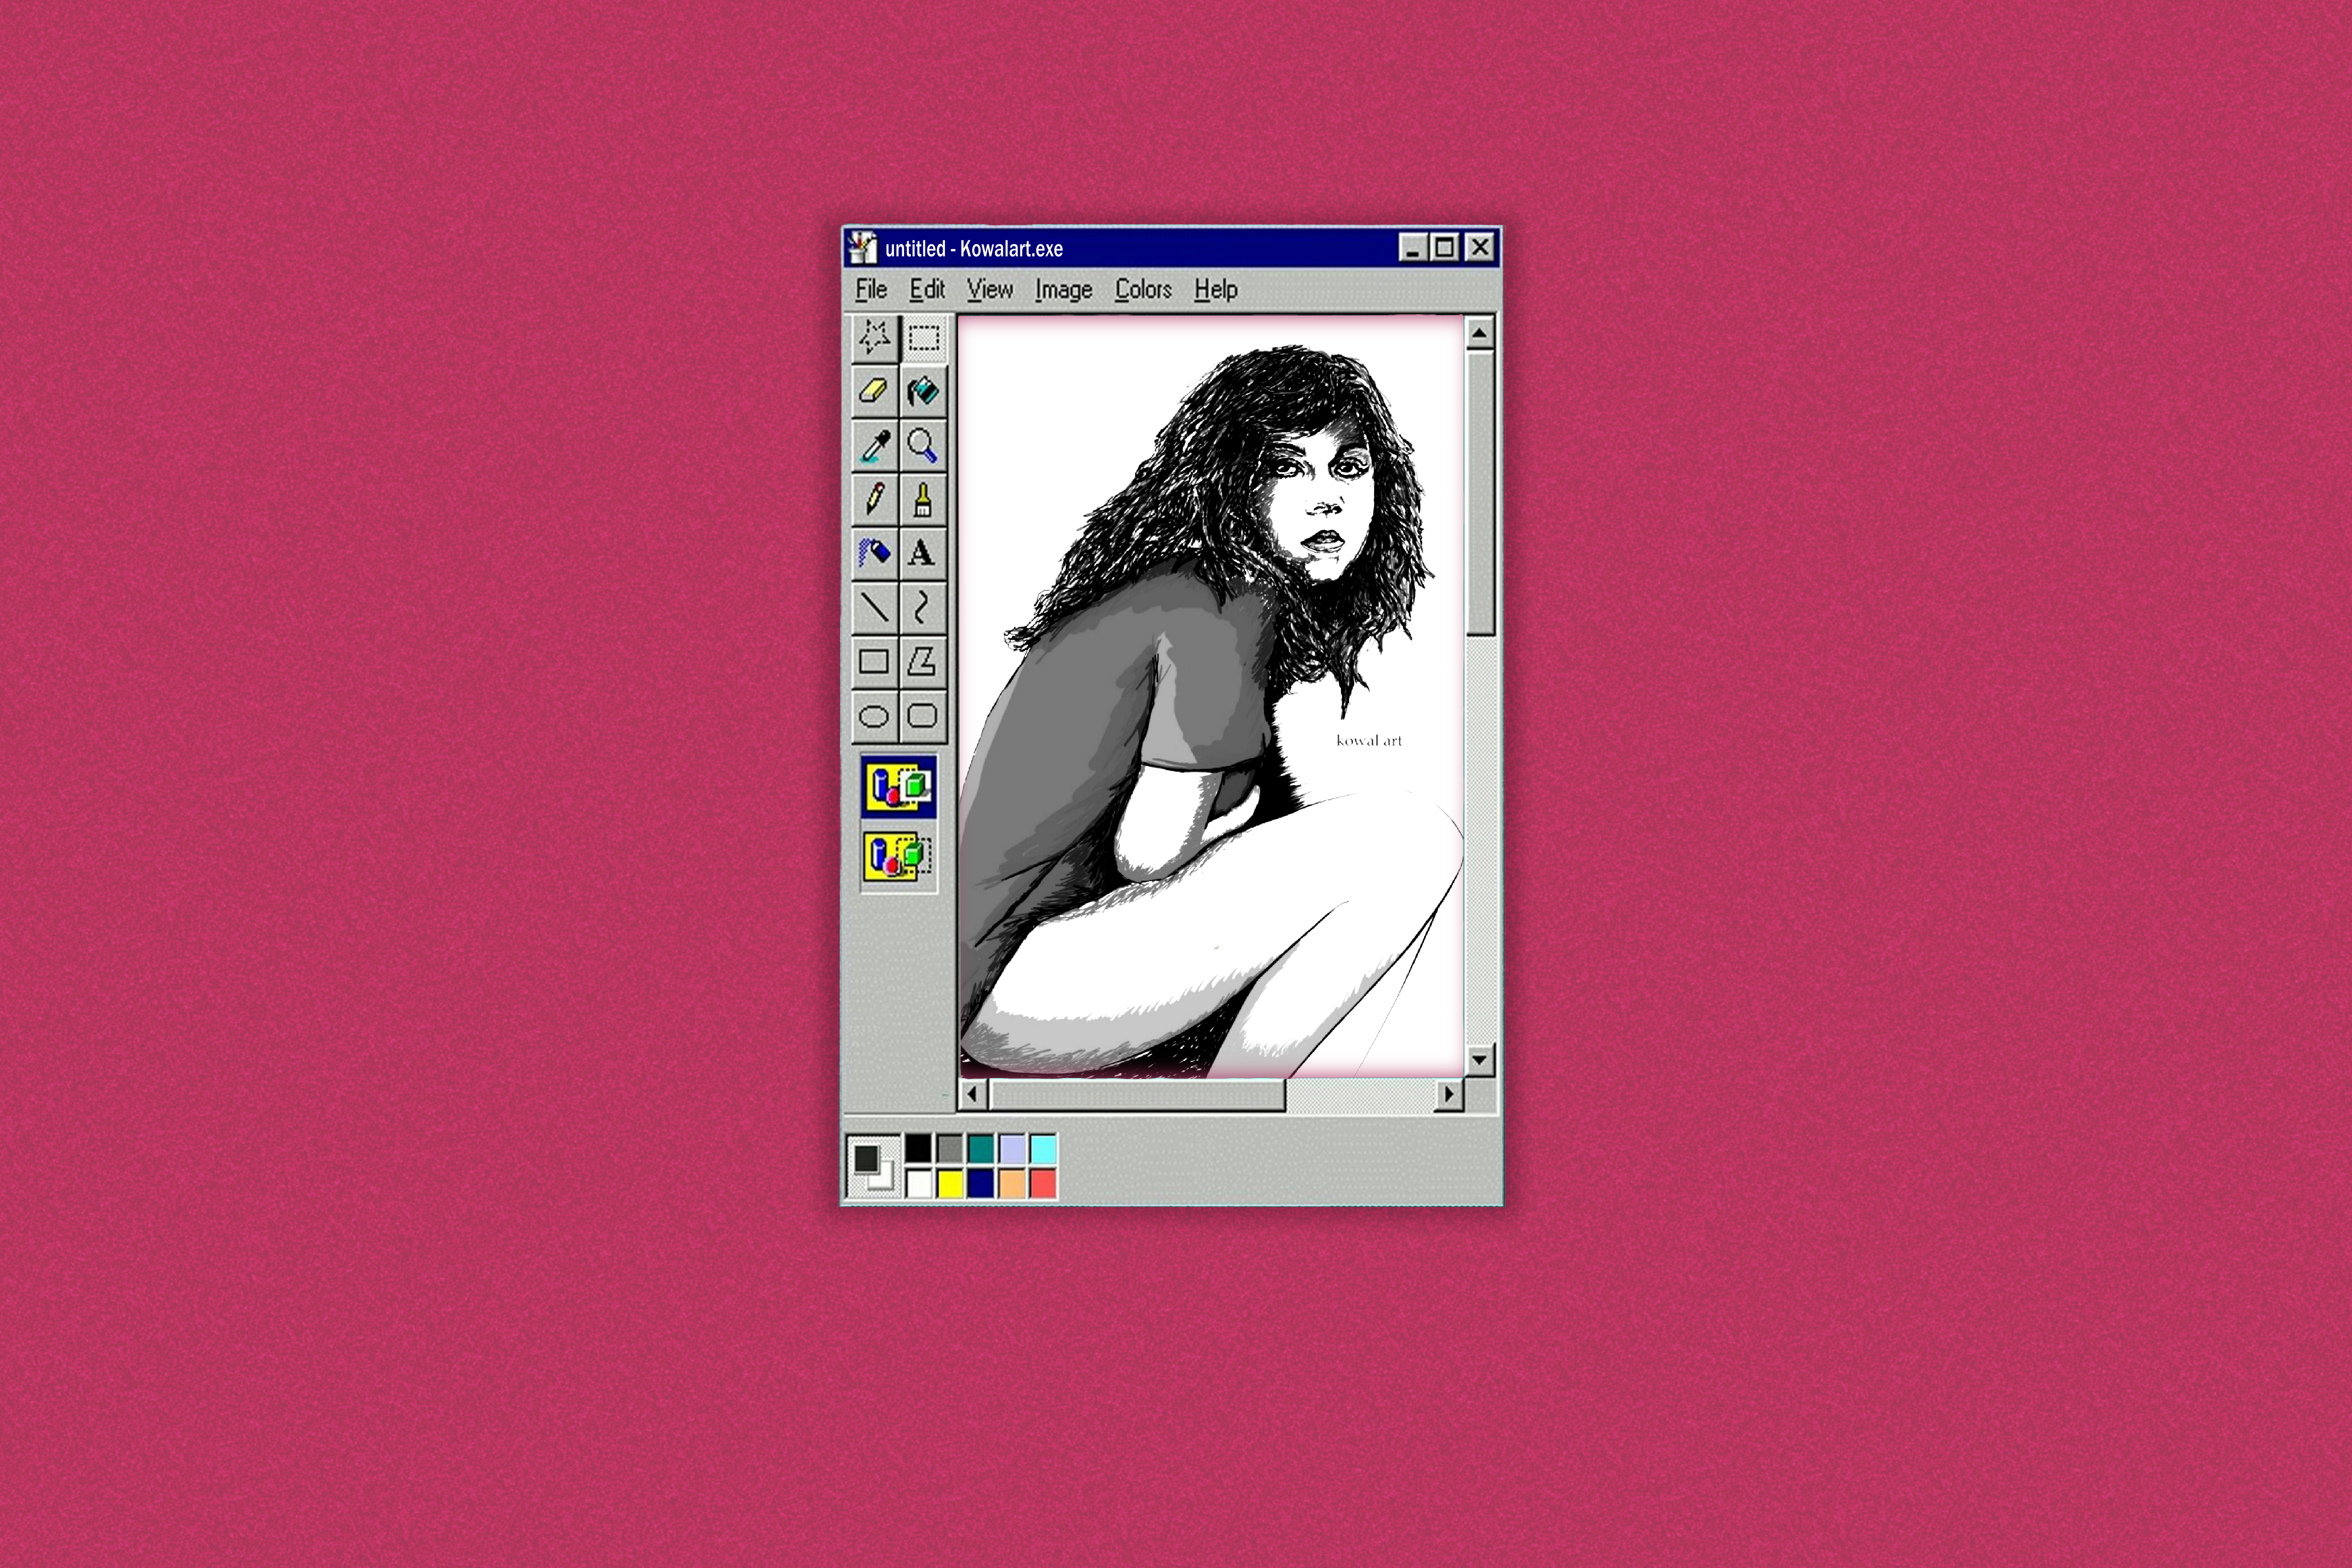 General 5120x3413 Windows 95 retro games simple background legs women pink background side view KowalArt Jennette McCurdy bent legs long hair parted lips